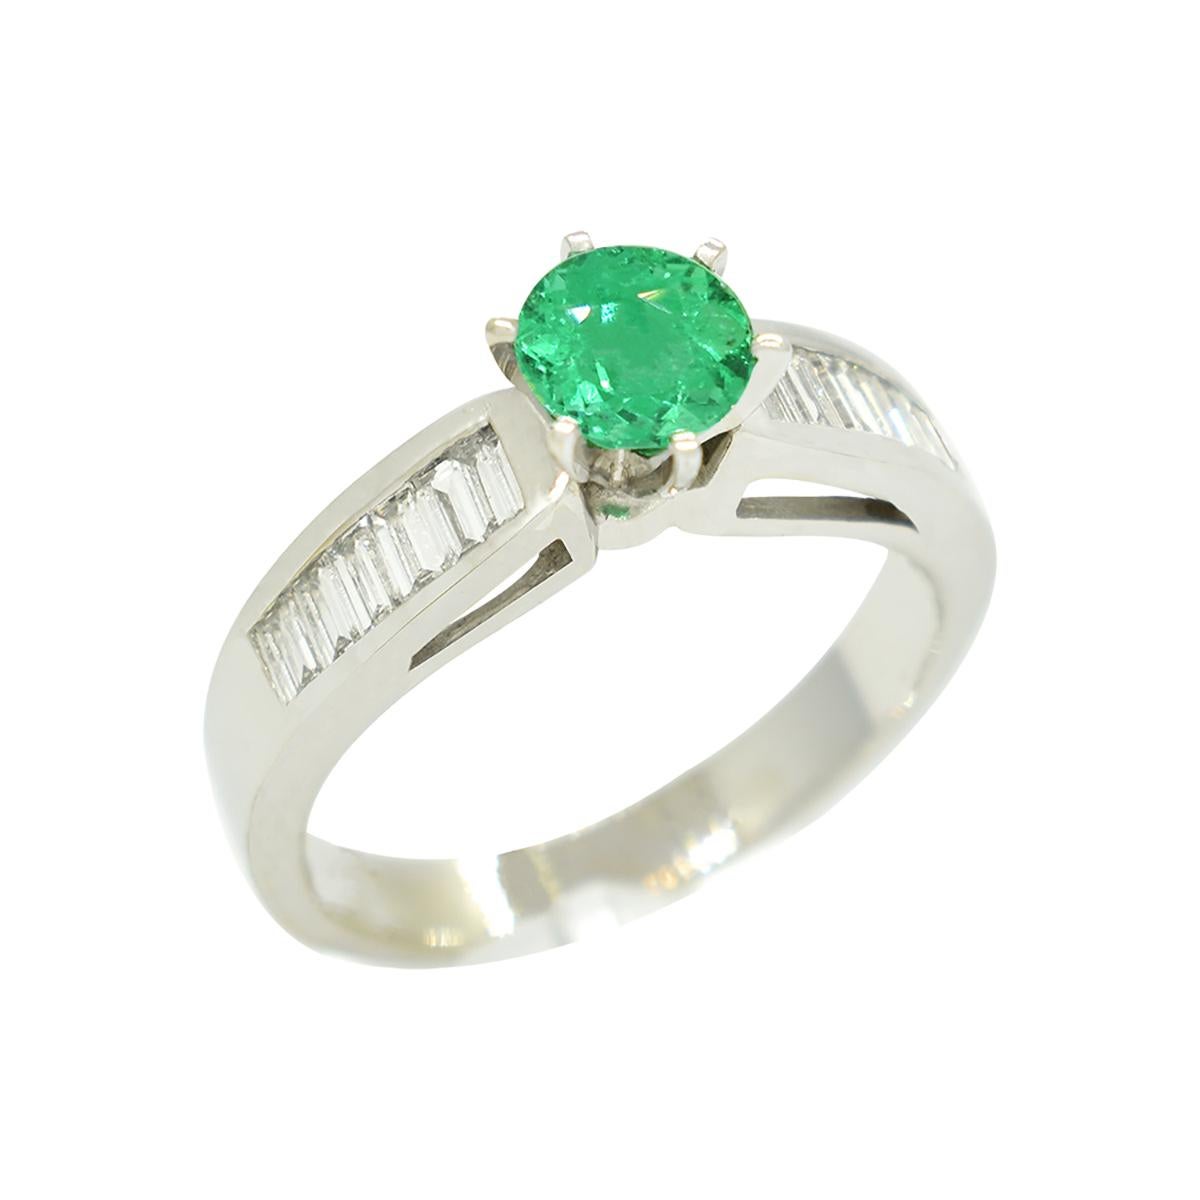 Round Cut 0.66 Carats Emerald Engagement Ring in White Gold With Baguette Cut Diamonds For Sale